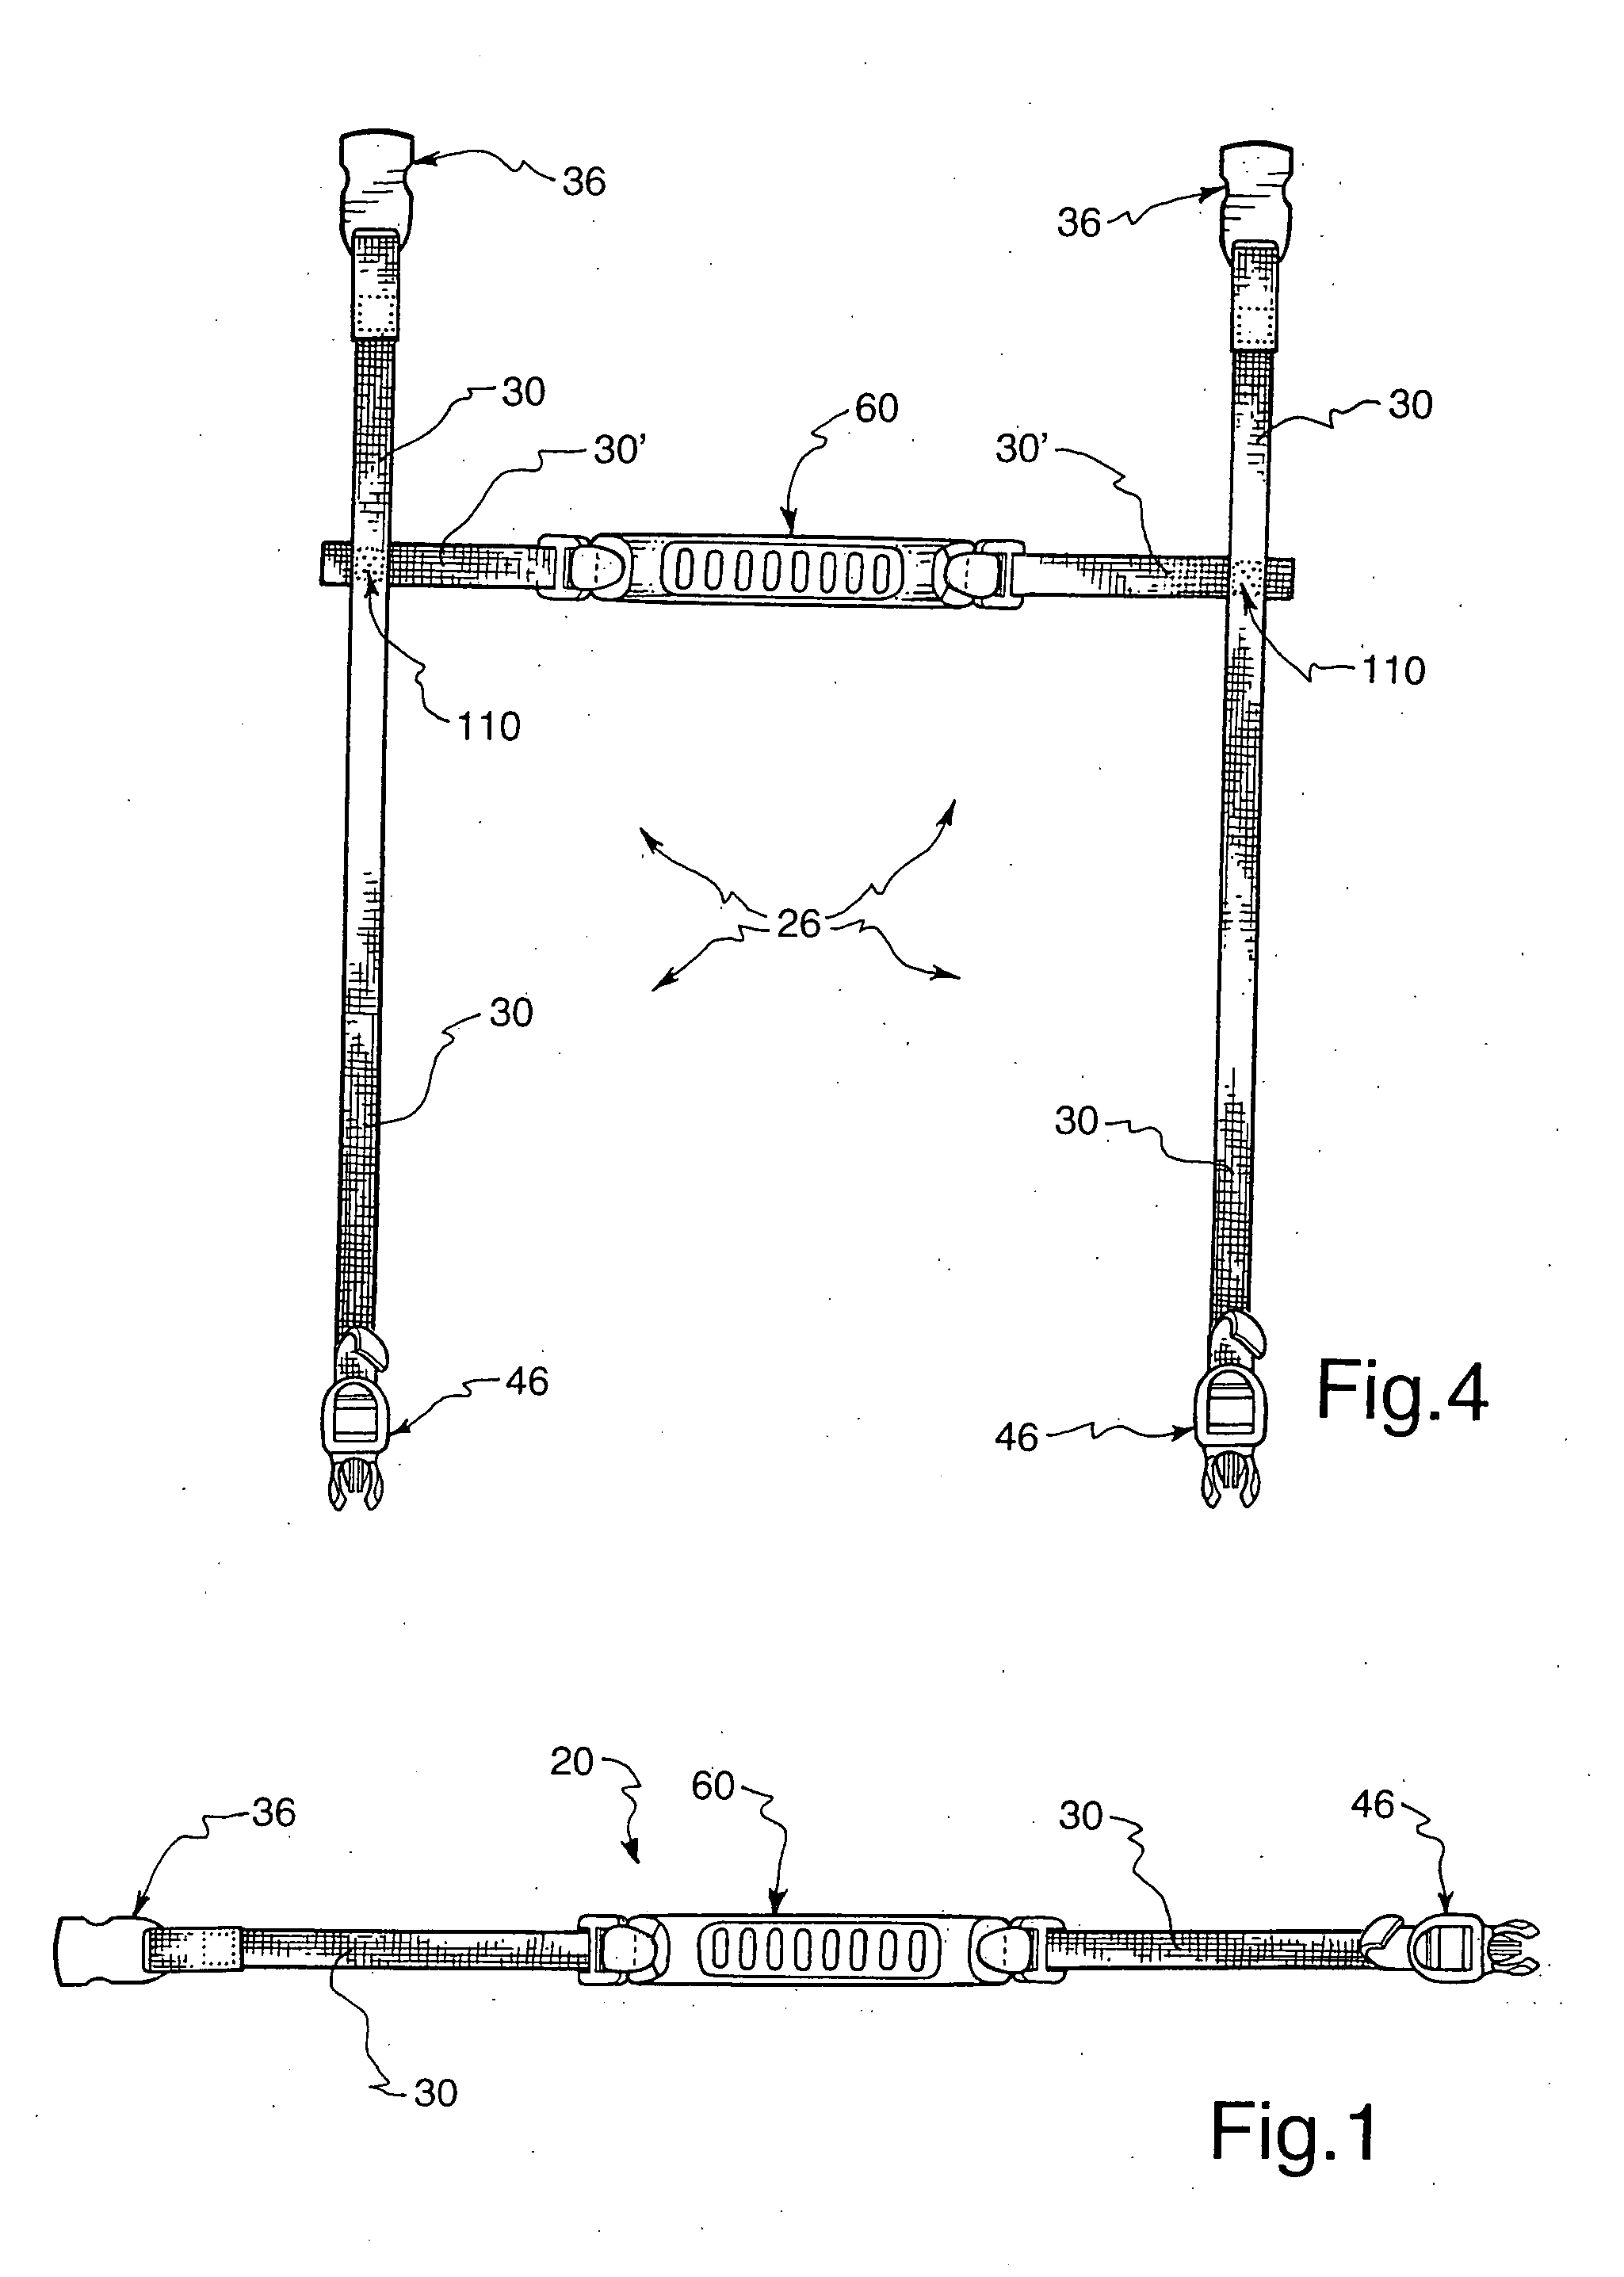 Reusable, adjustable carriers for toting awkward handle-less items and related methods